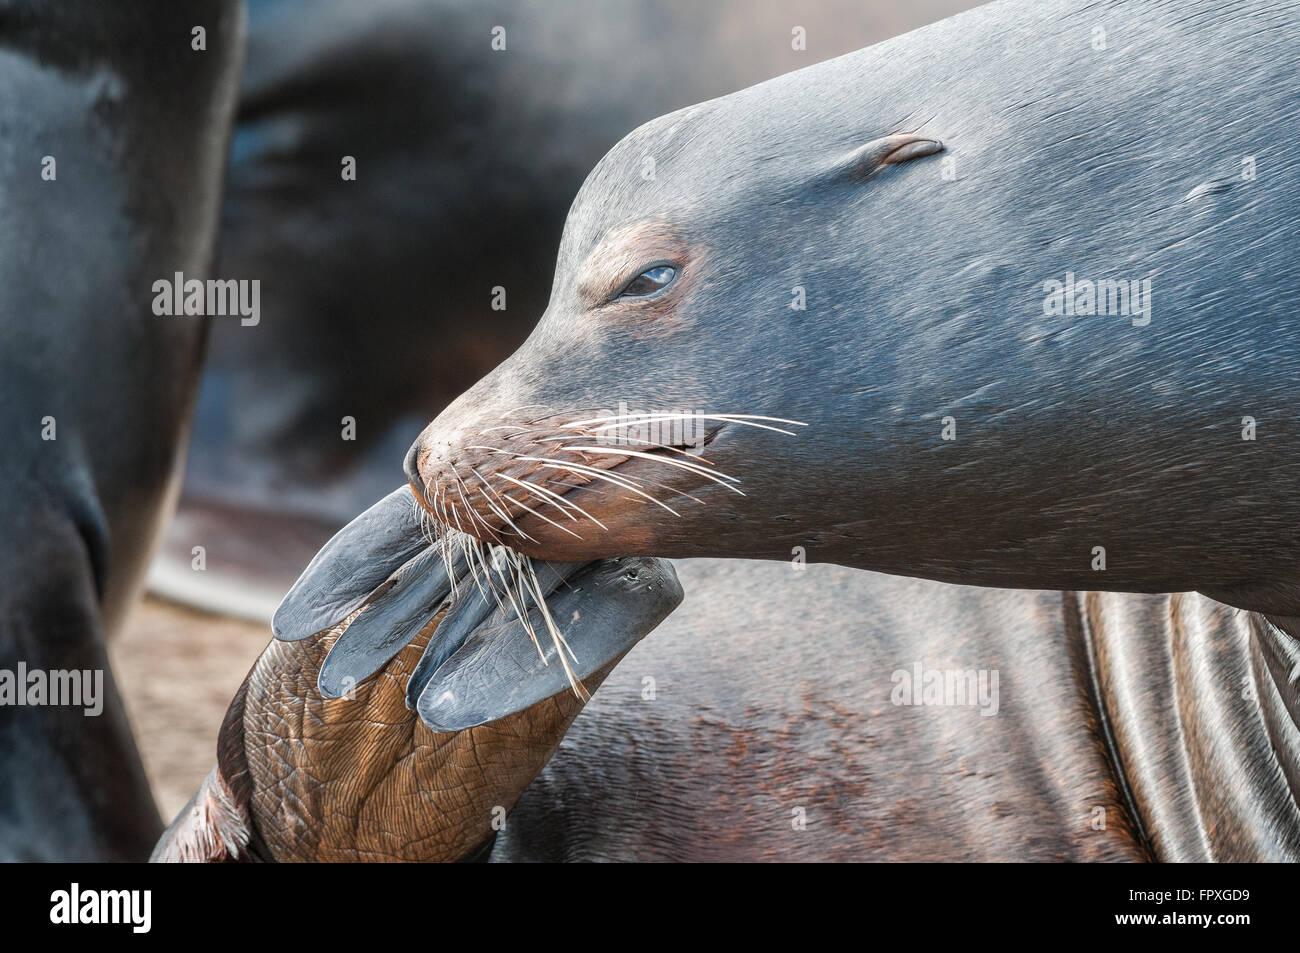 A male California Sea Lion (Zalophus californianus) scratches an itch with his hind flipper. Rainier, Oregon, United States. Stock Photo